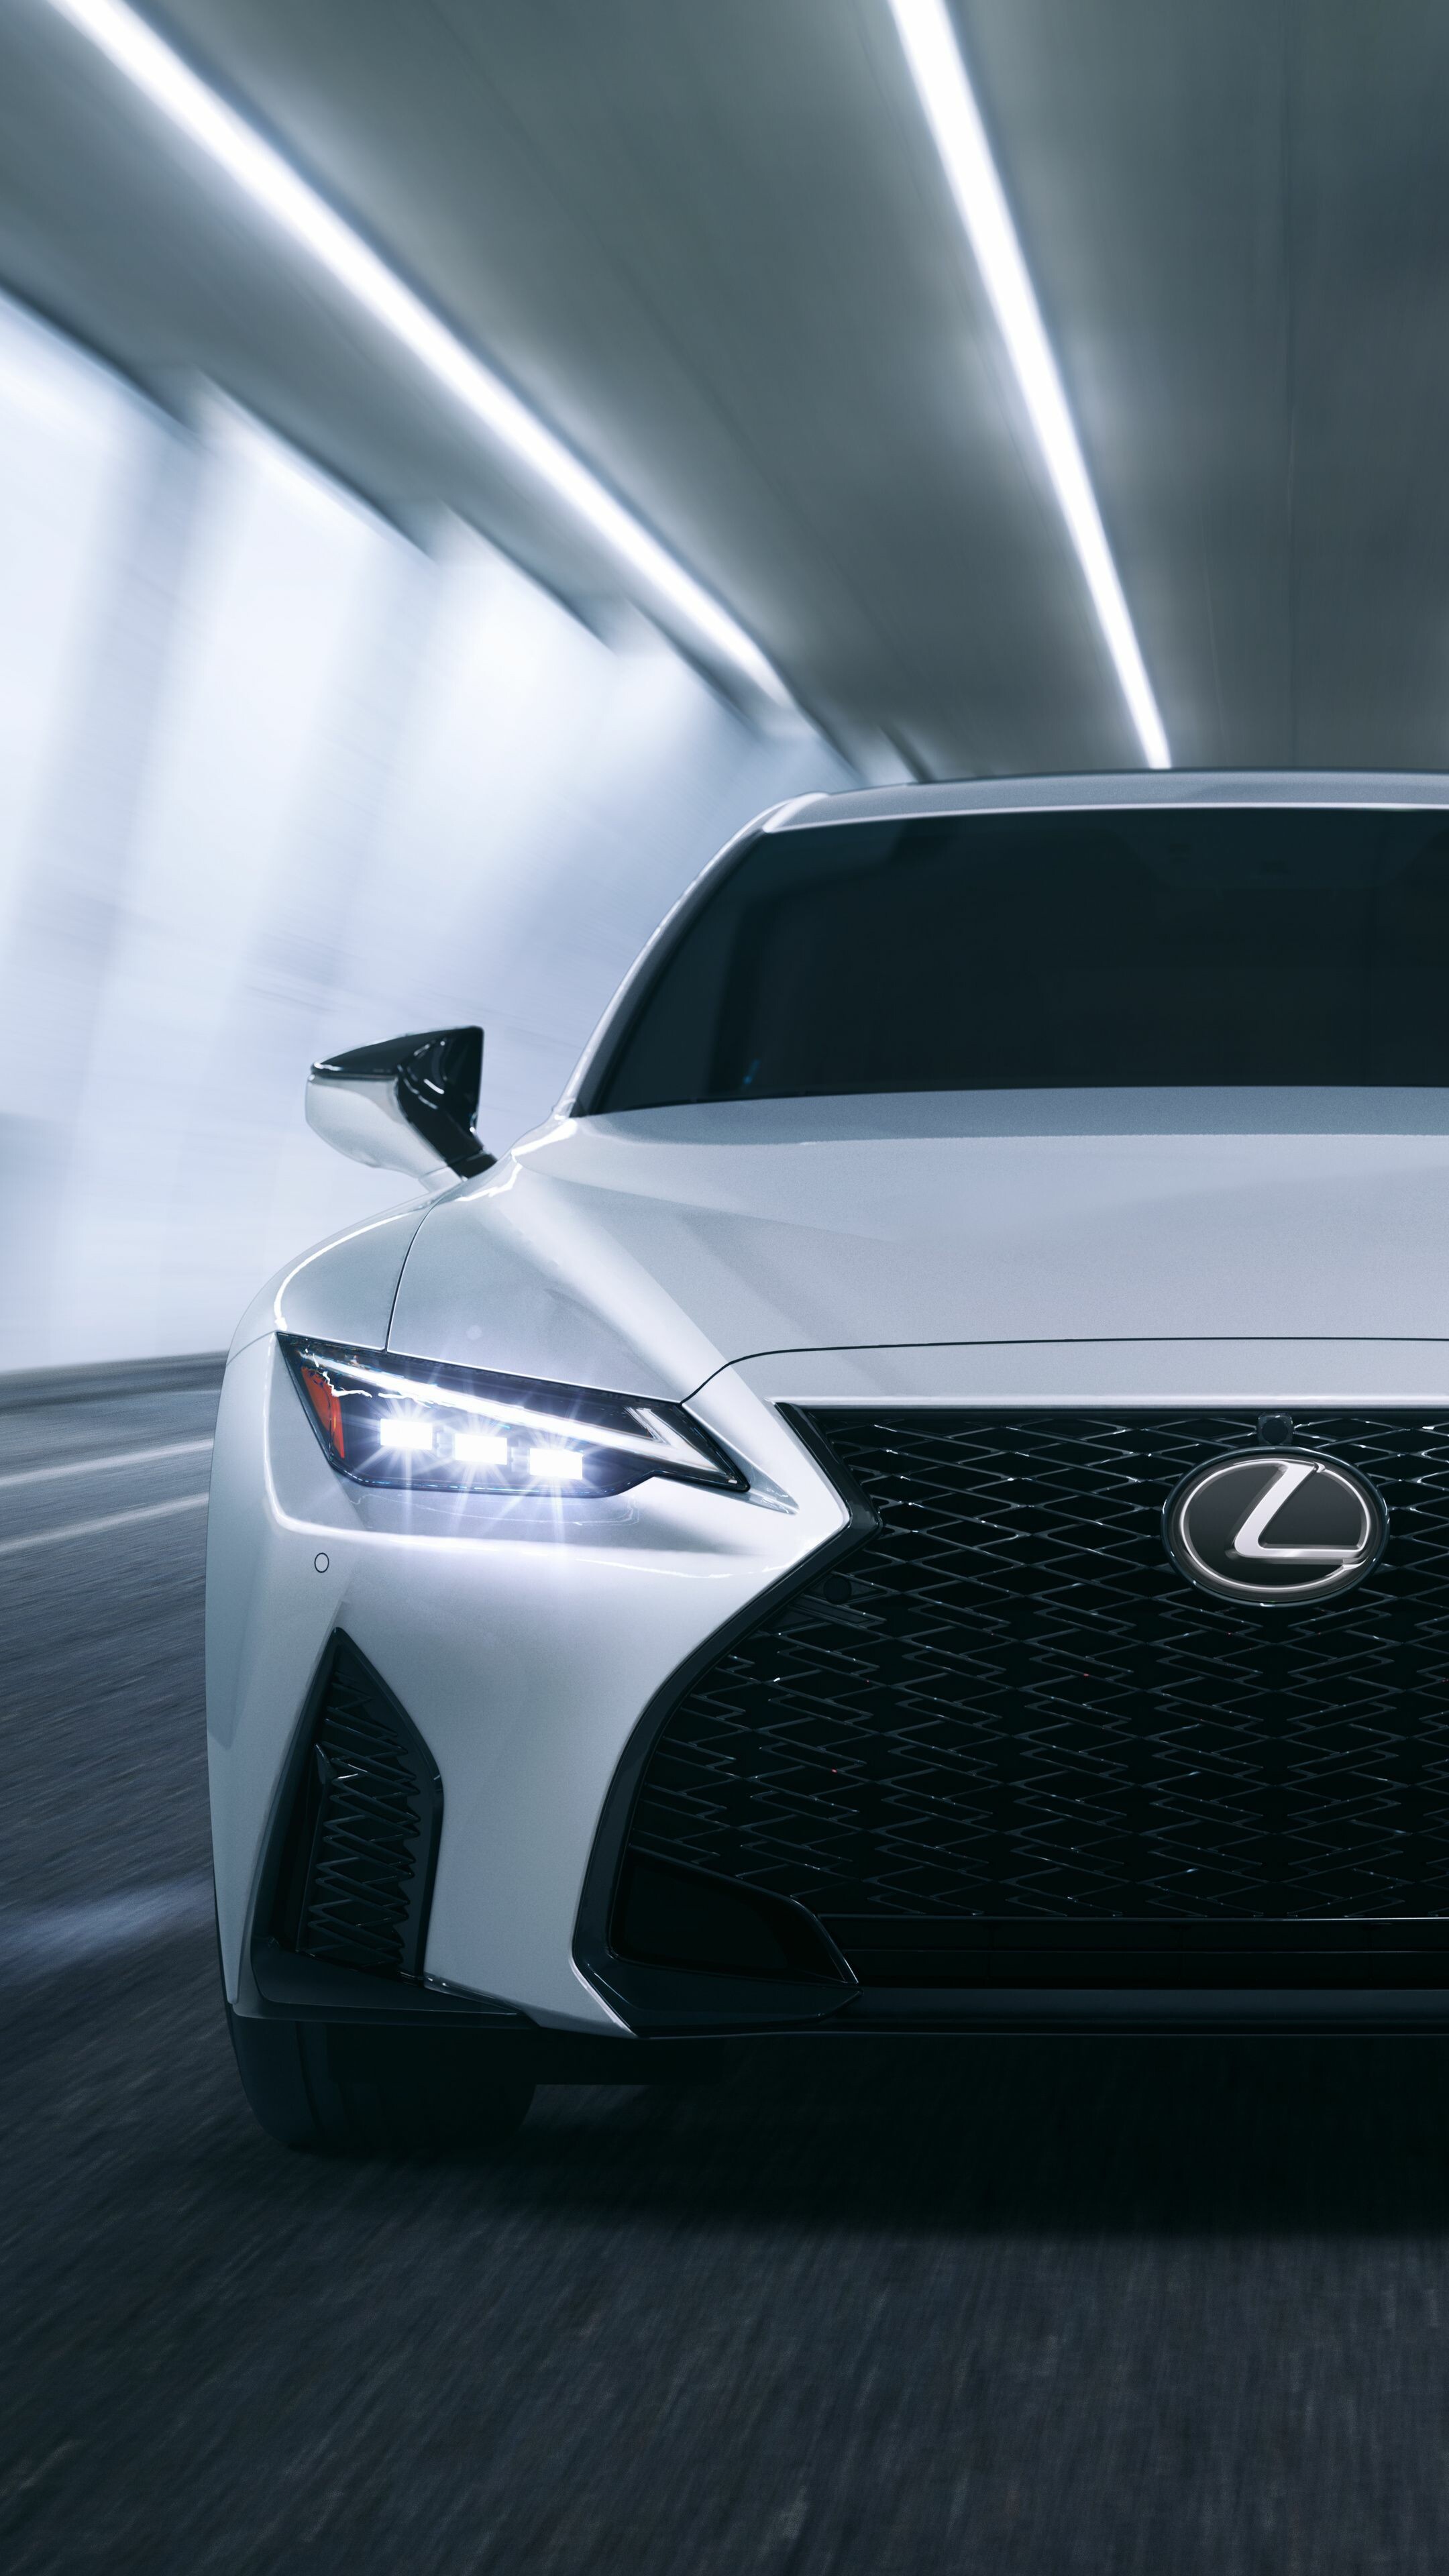 Lexus: Vehicles, Produced in Japan, with manufacturing centered in the Chubu and Kyushu regions. 2160x3840 4K Background.